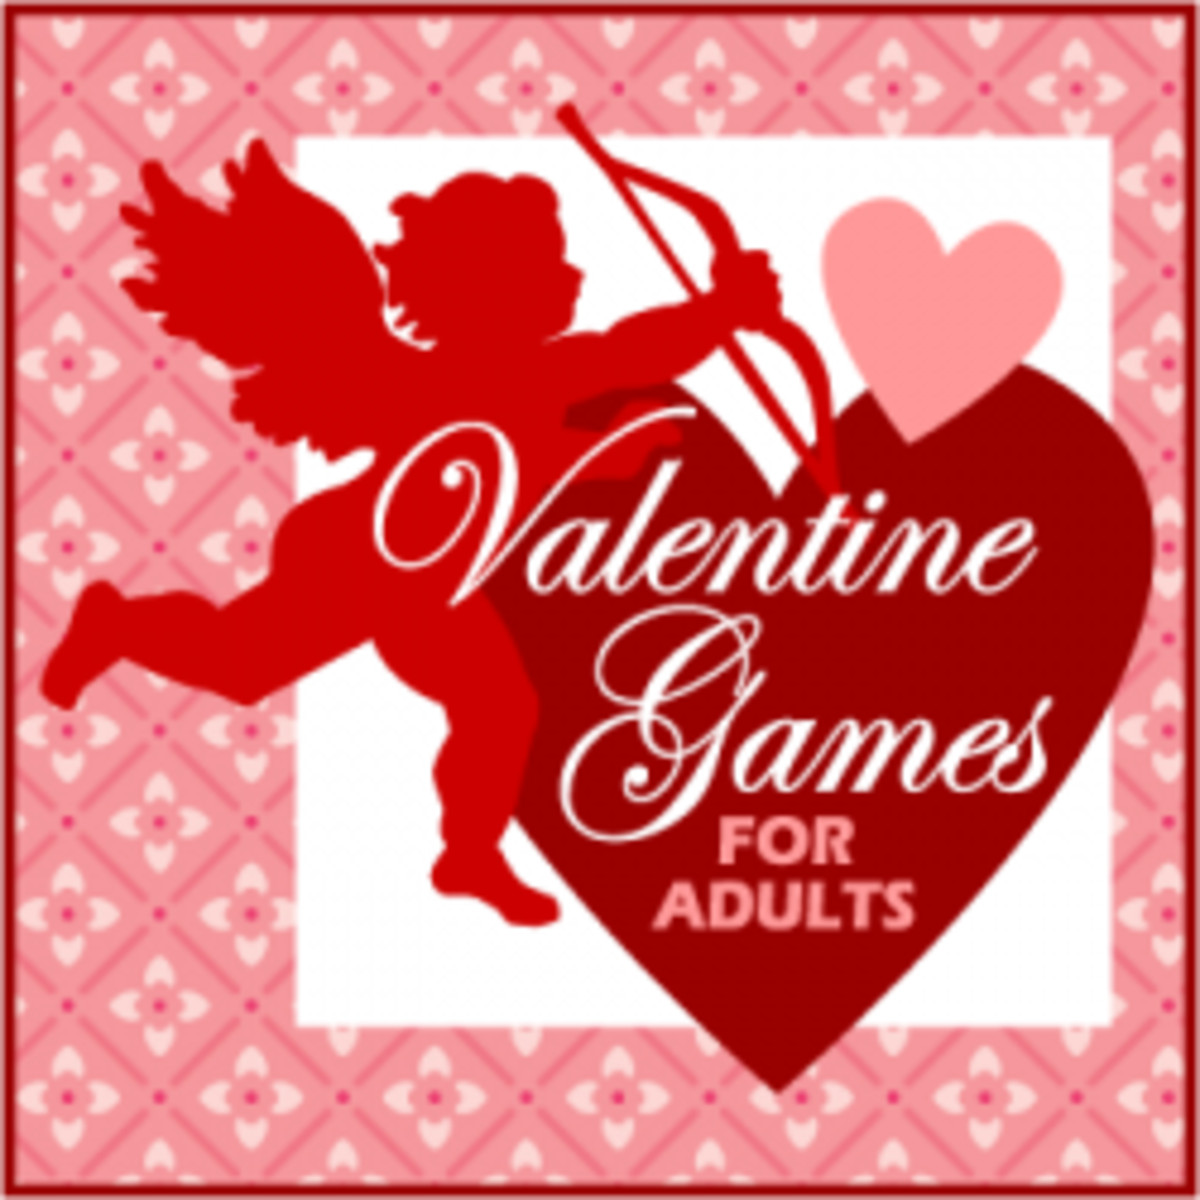 Valentines Day Party Games For Adults
 Valentine Games for Adults